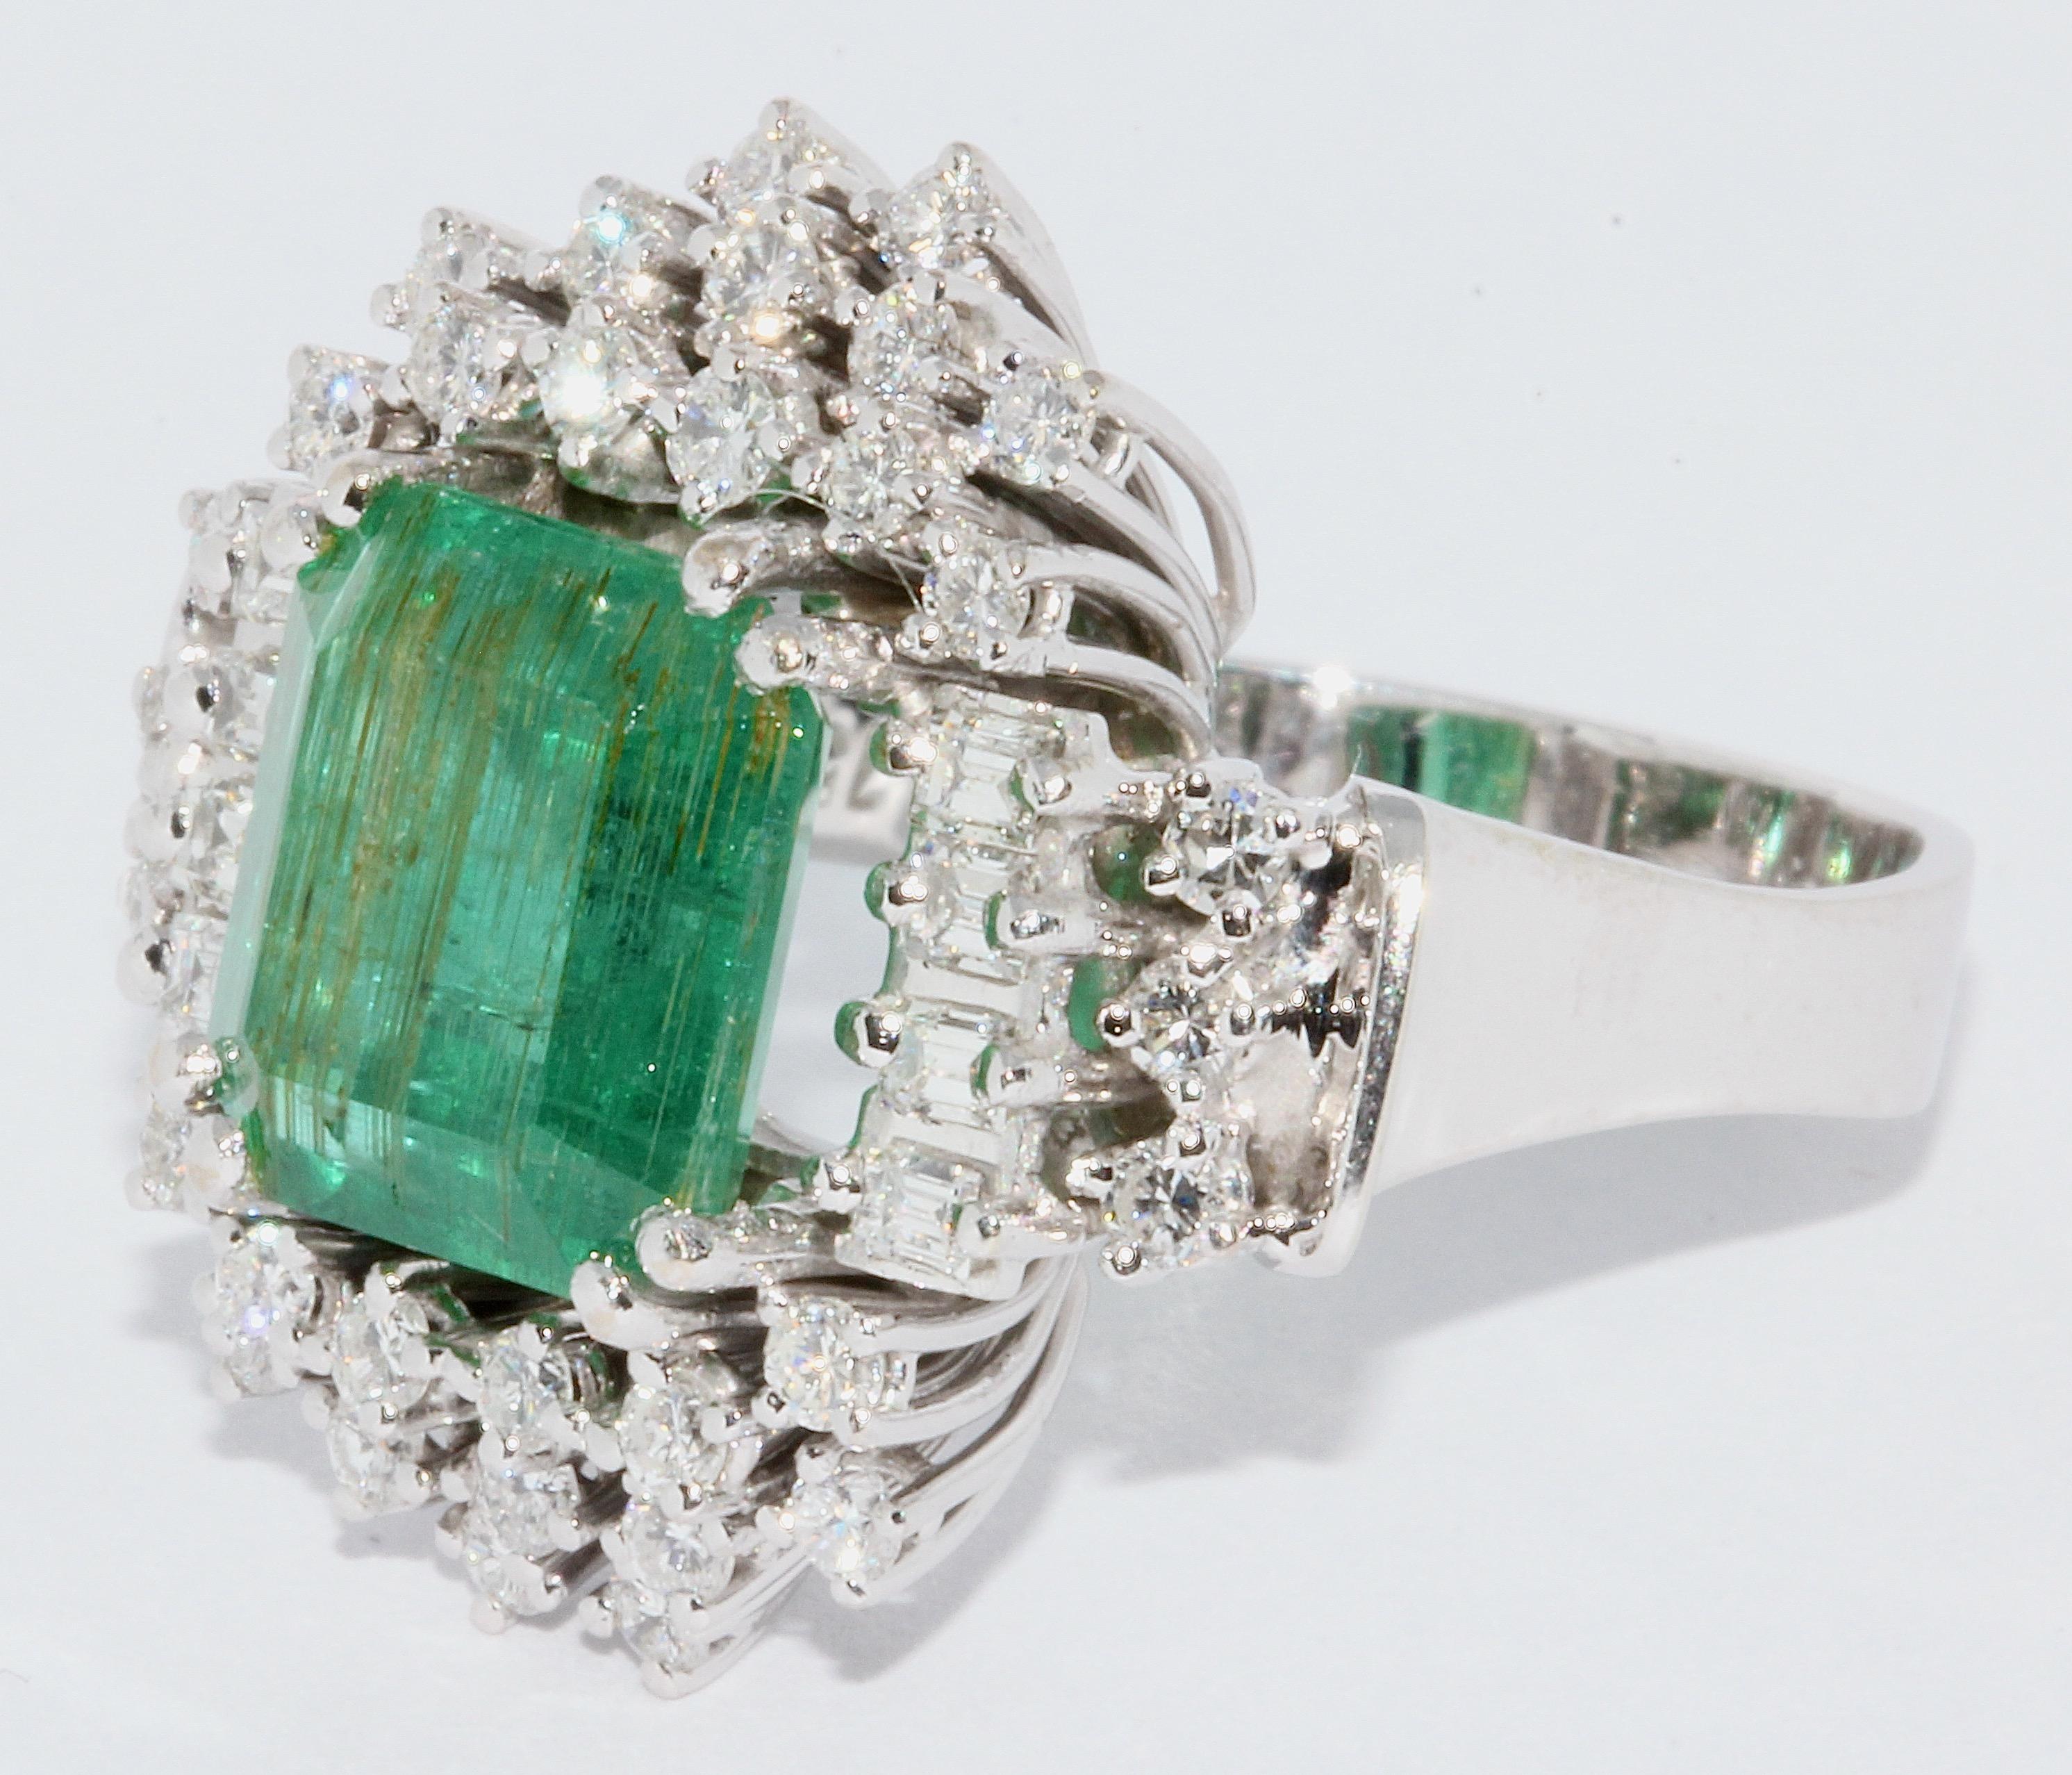 18 Karat White Gold Ring Set with White Diamonds and Large 4.5 Carat Emerald In Good Condition For Sale In Berlin, DE